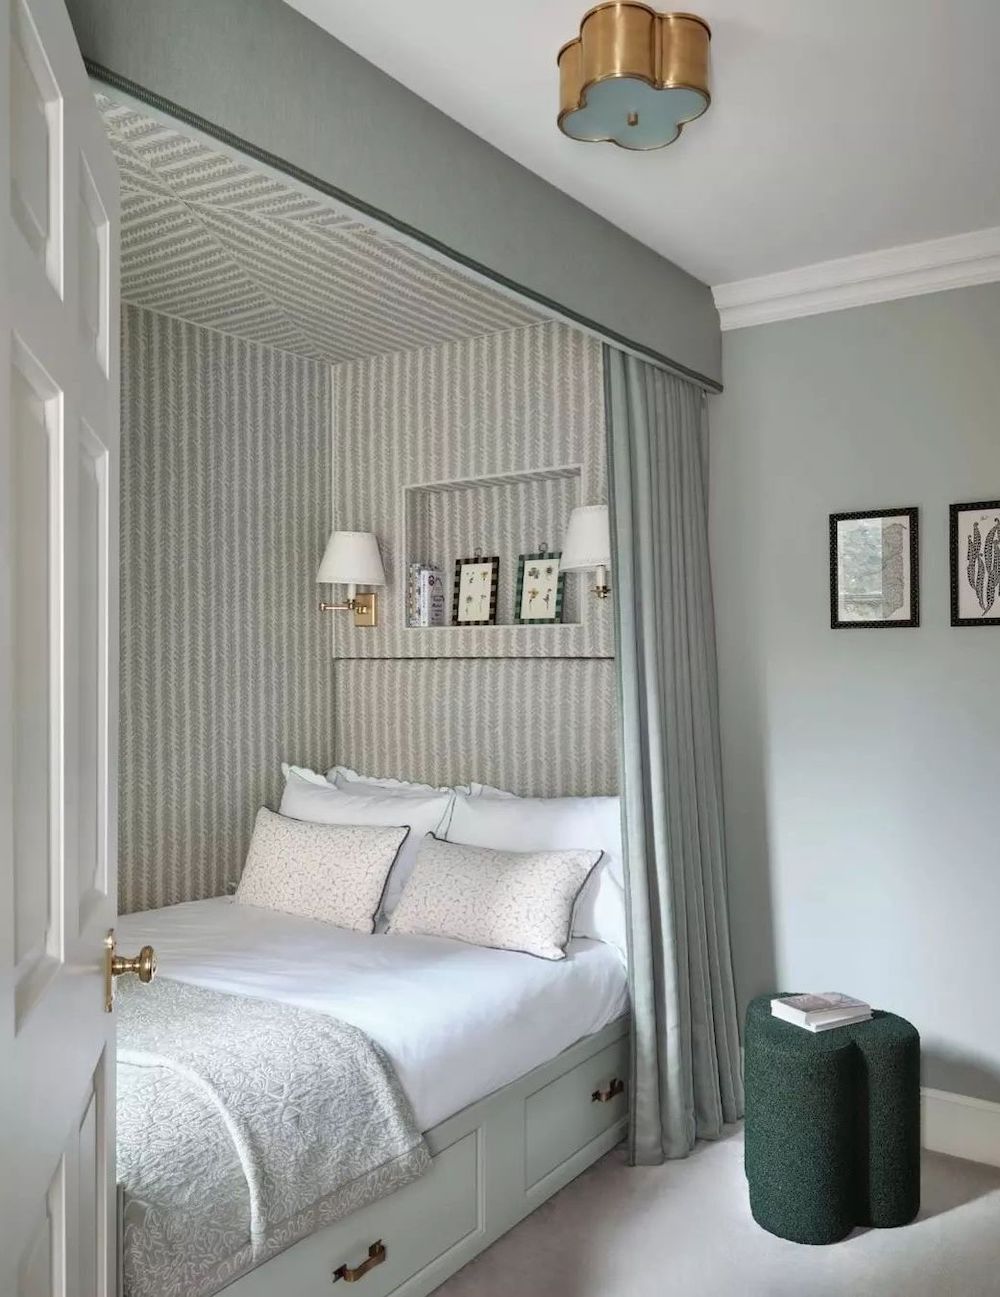 a bedroom with striped wallpaper, blue wall paint, and traditional decor